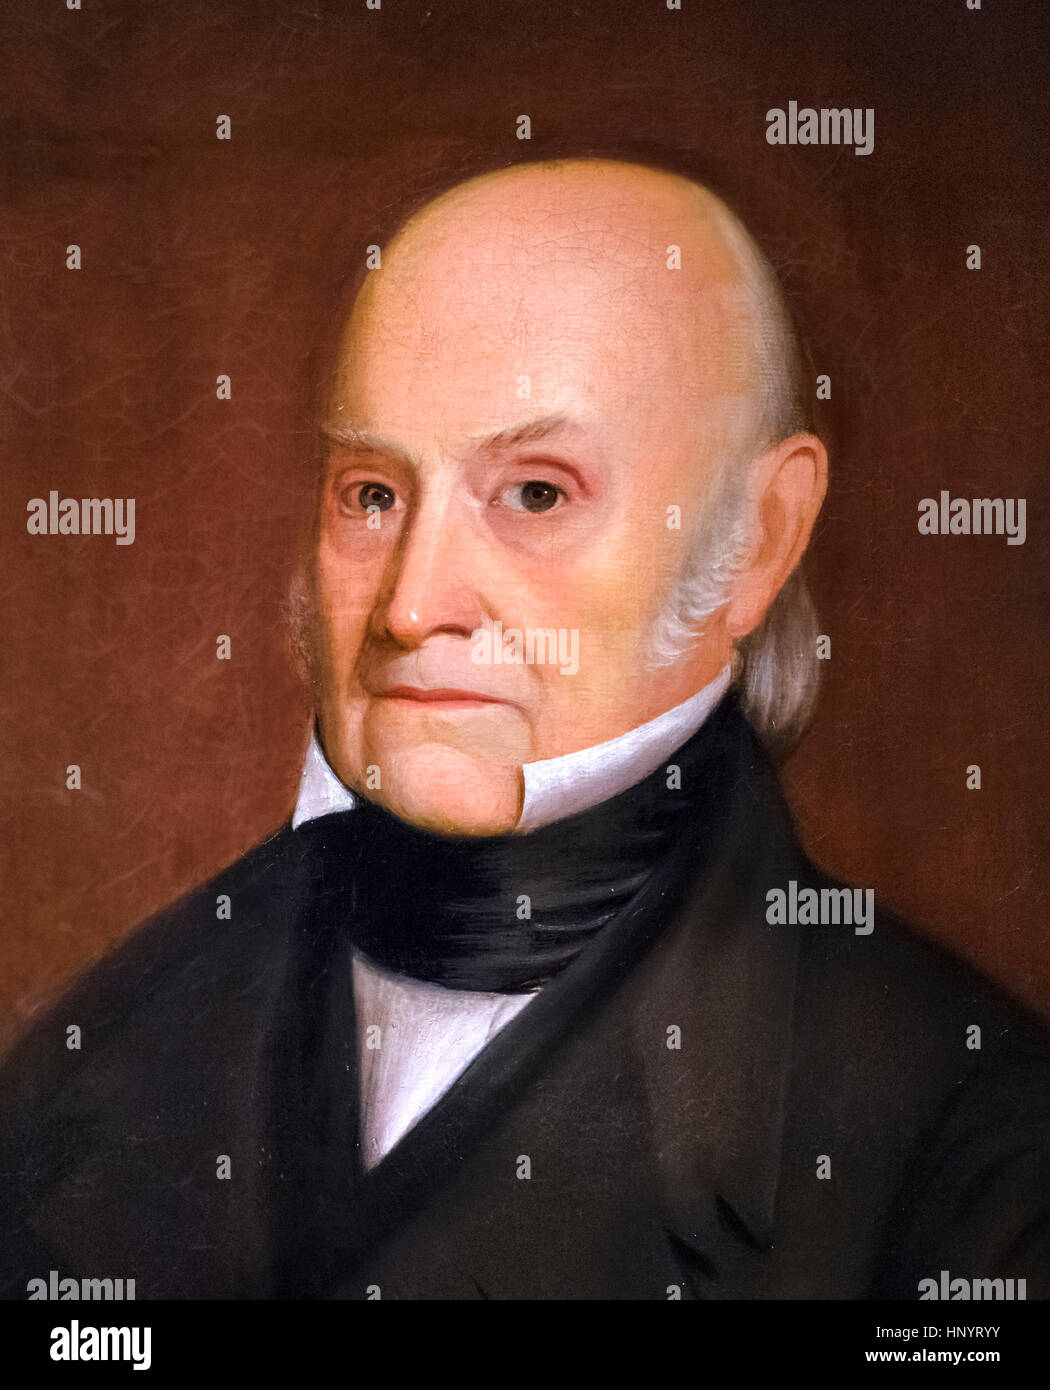 John Quincy Adams (1767-1848). Portrait of the 6th US President by William Hudson Jr, oil on canvas, 1844. Detail from a larger painting, HNYT02. Stock Photo